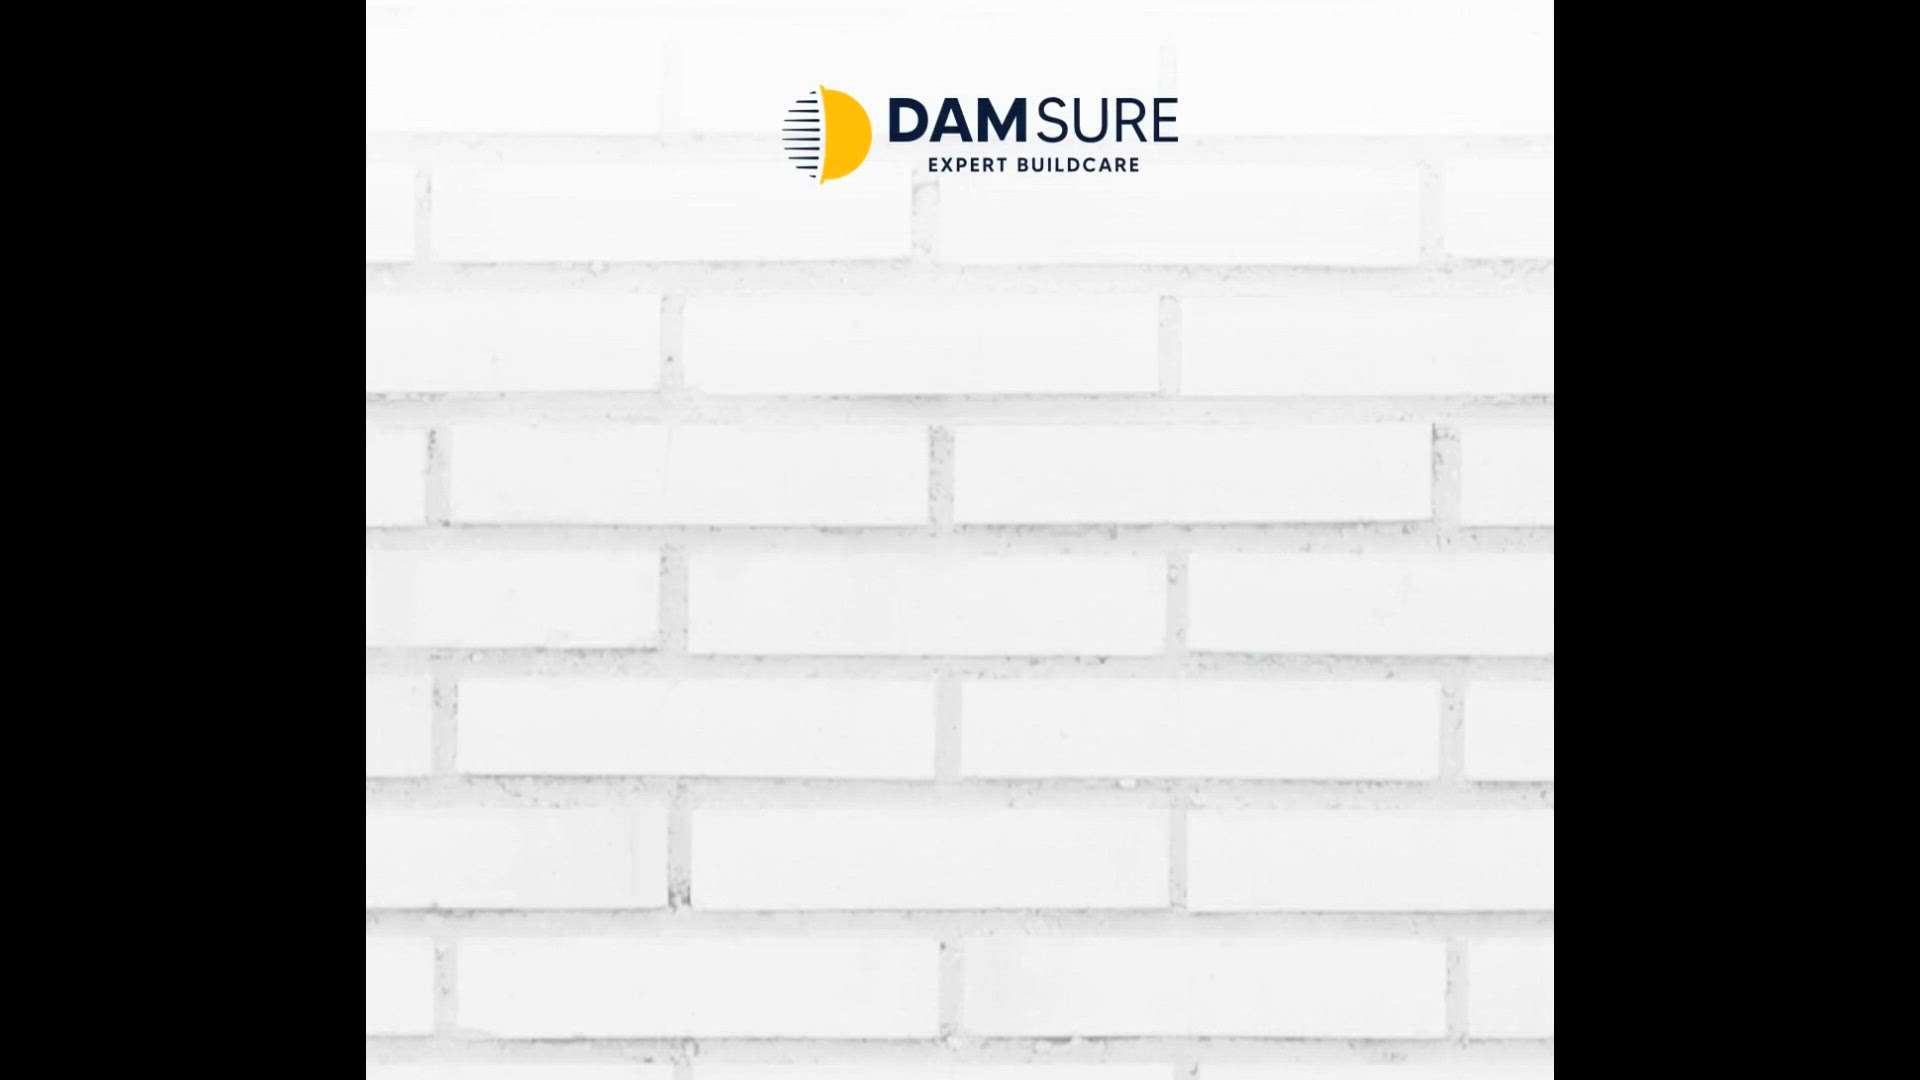 Tips
4 signs your structure requires waterproofing
.
.
.
#damsure #damsureproducts #damsurewaterproofing #waterproofingservices